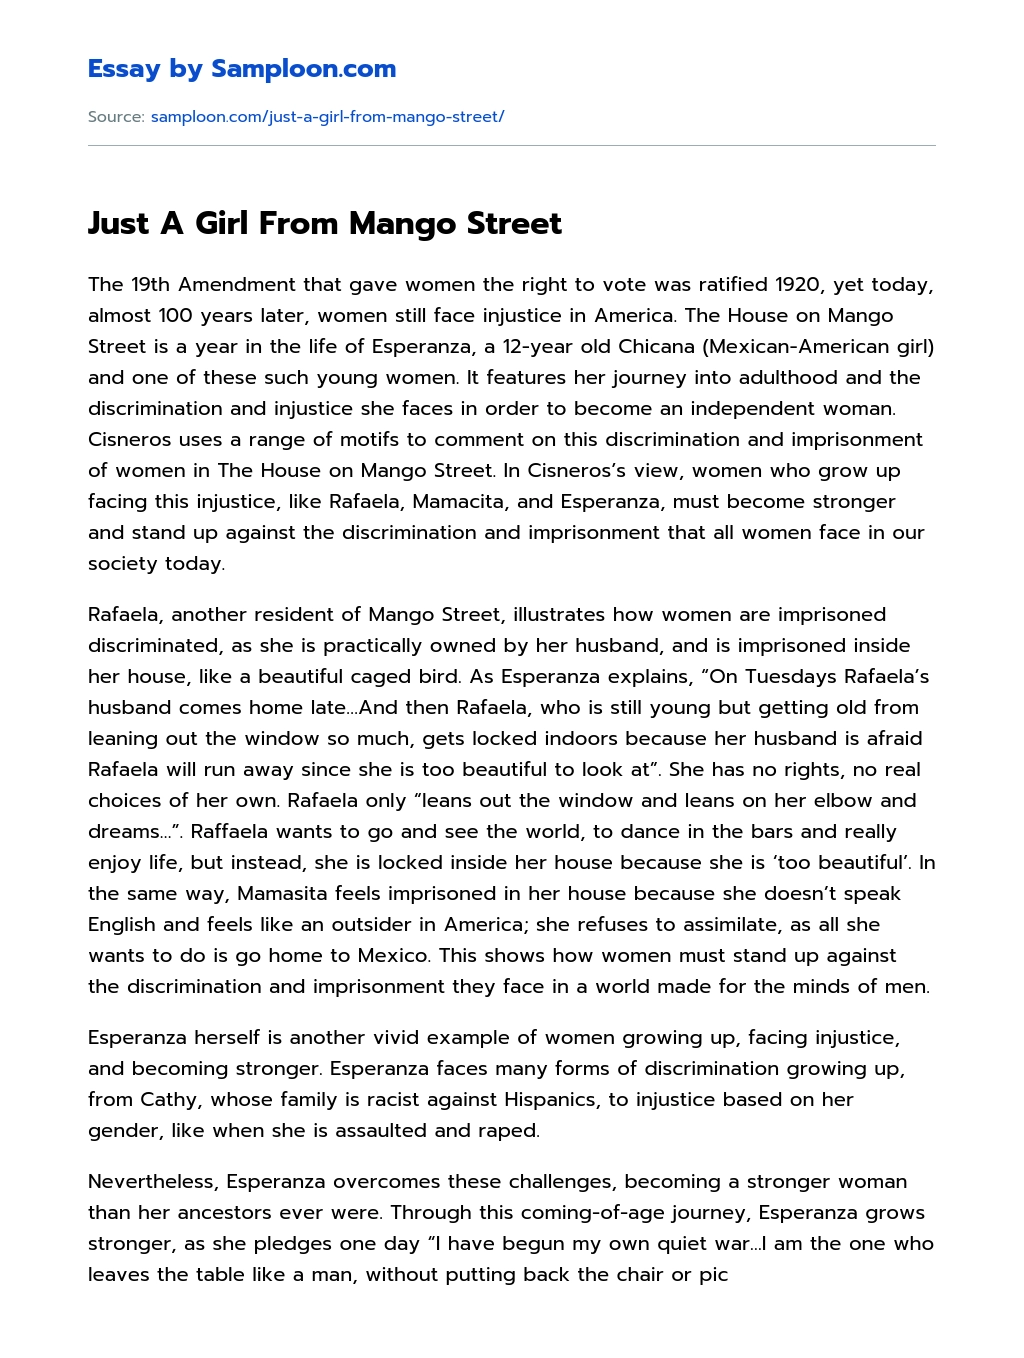 Just A Girl From Mango Street essay